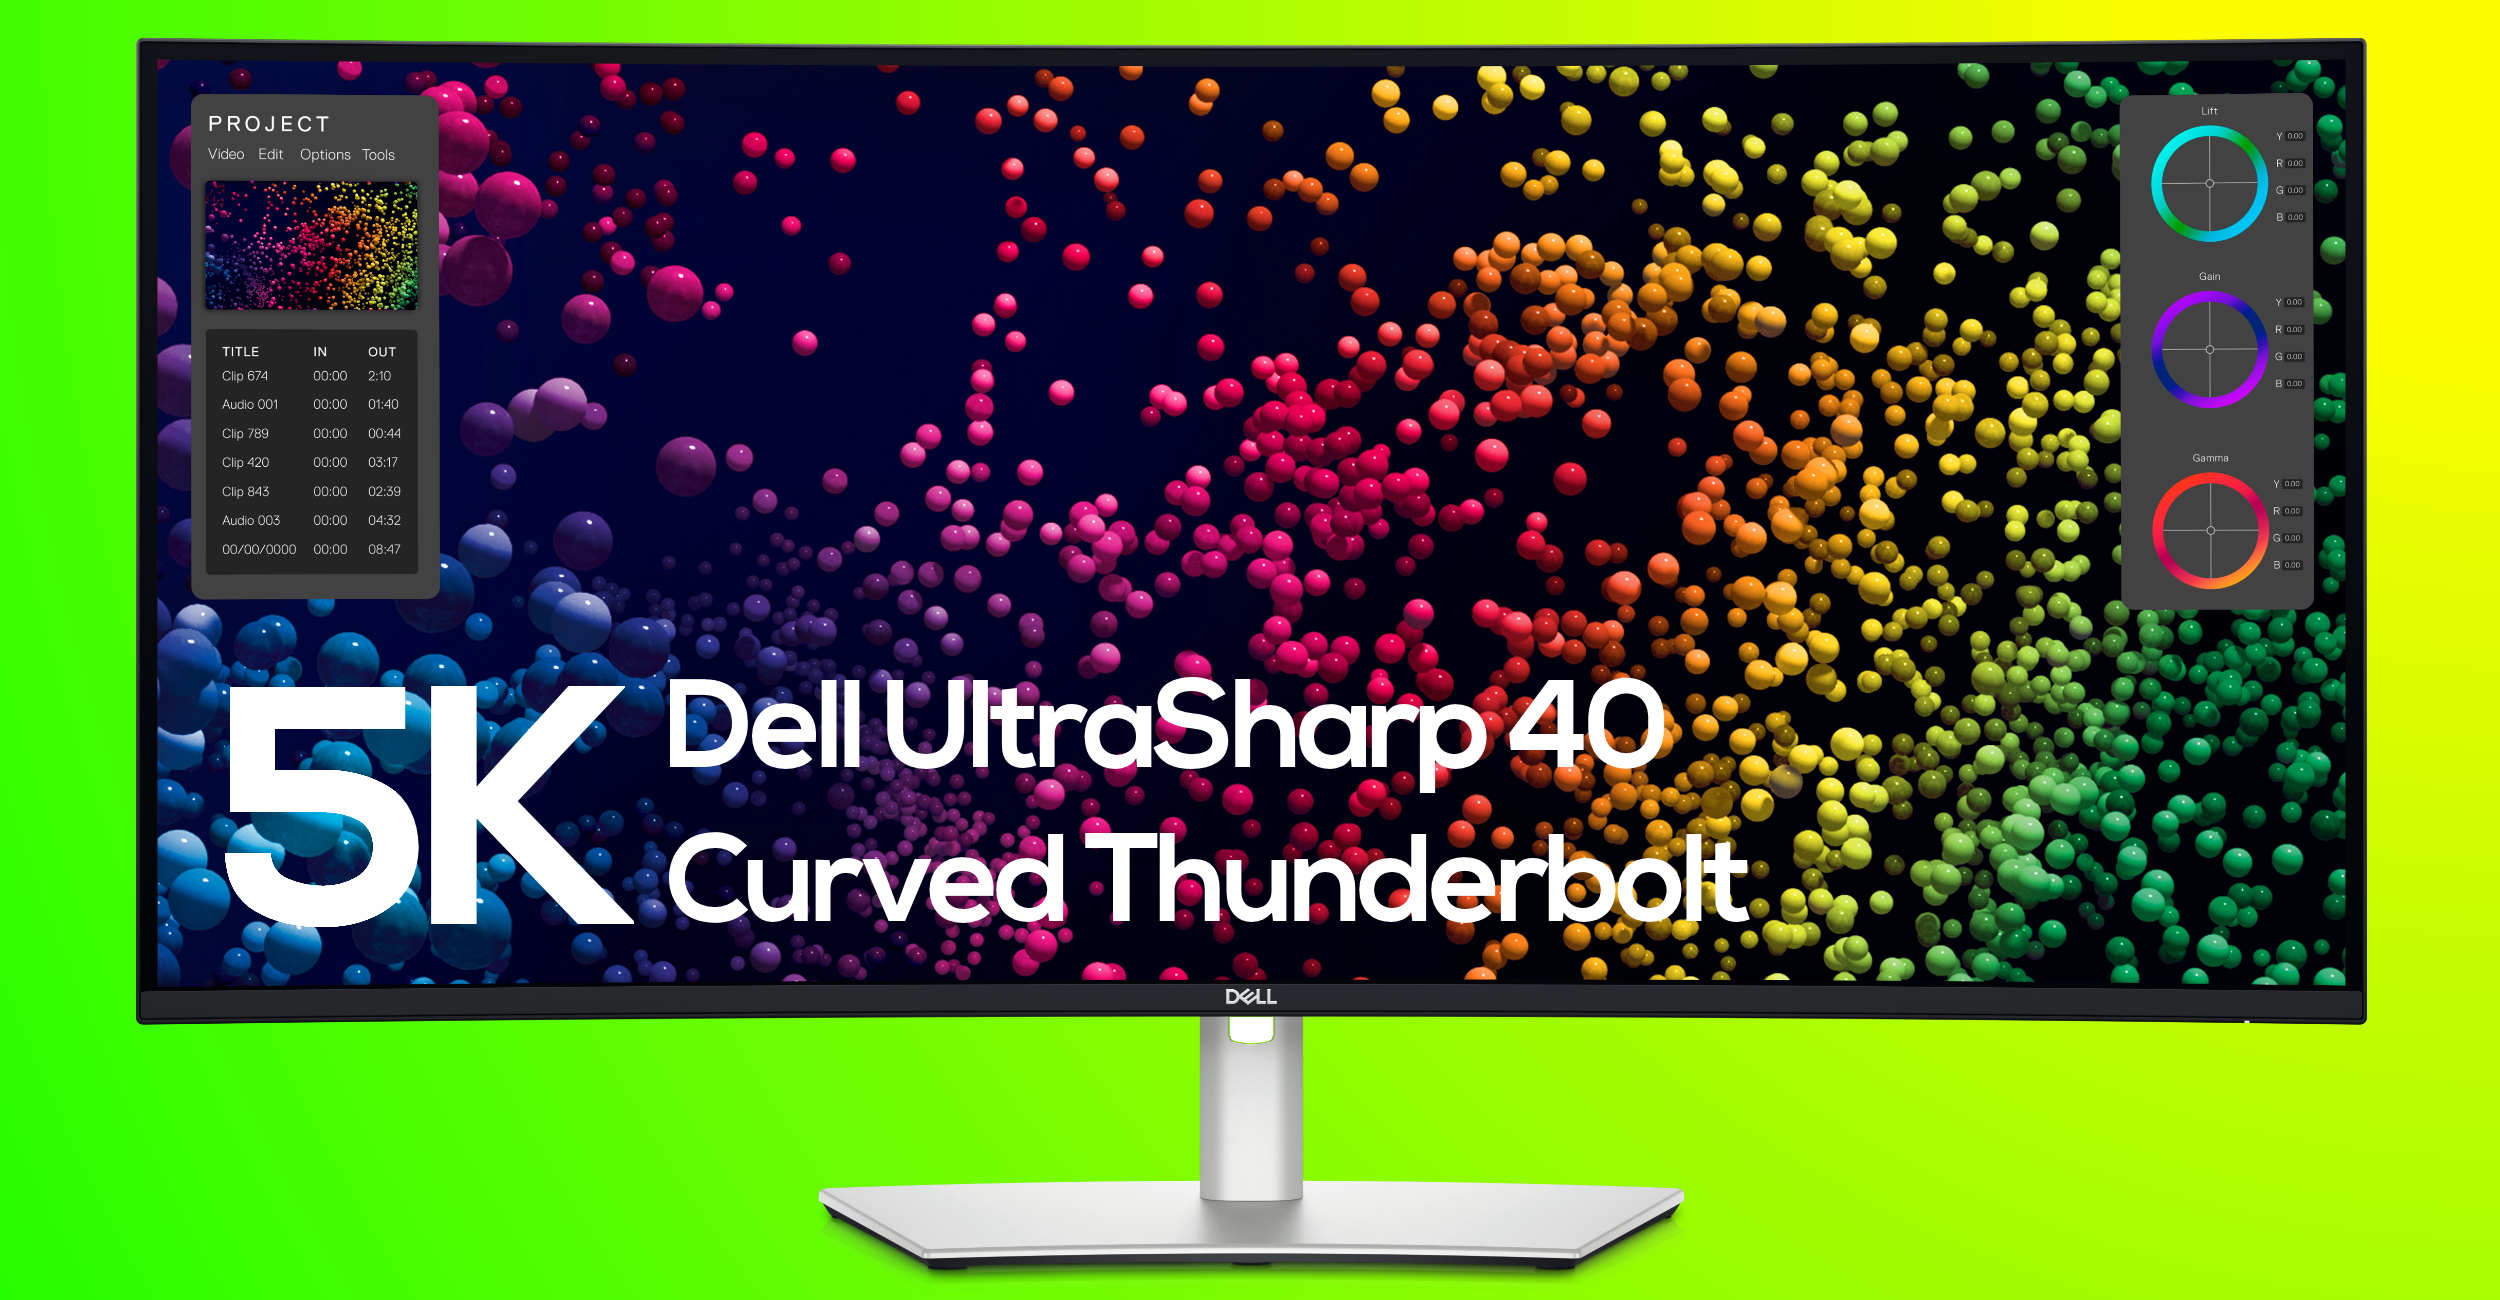 Dell’s UltraSharp Monitor Line Gets a Big Upgrade with New 40-Inch 5K Display